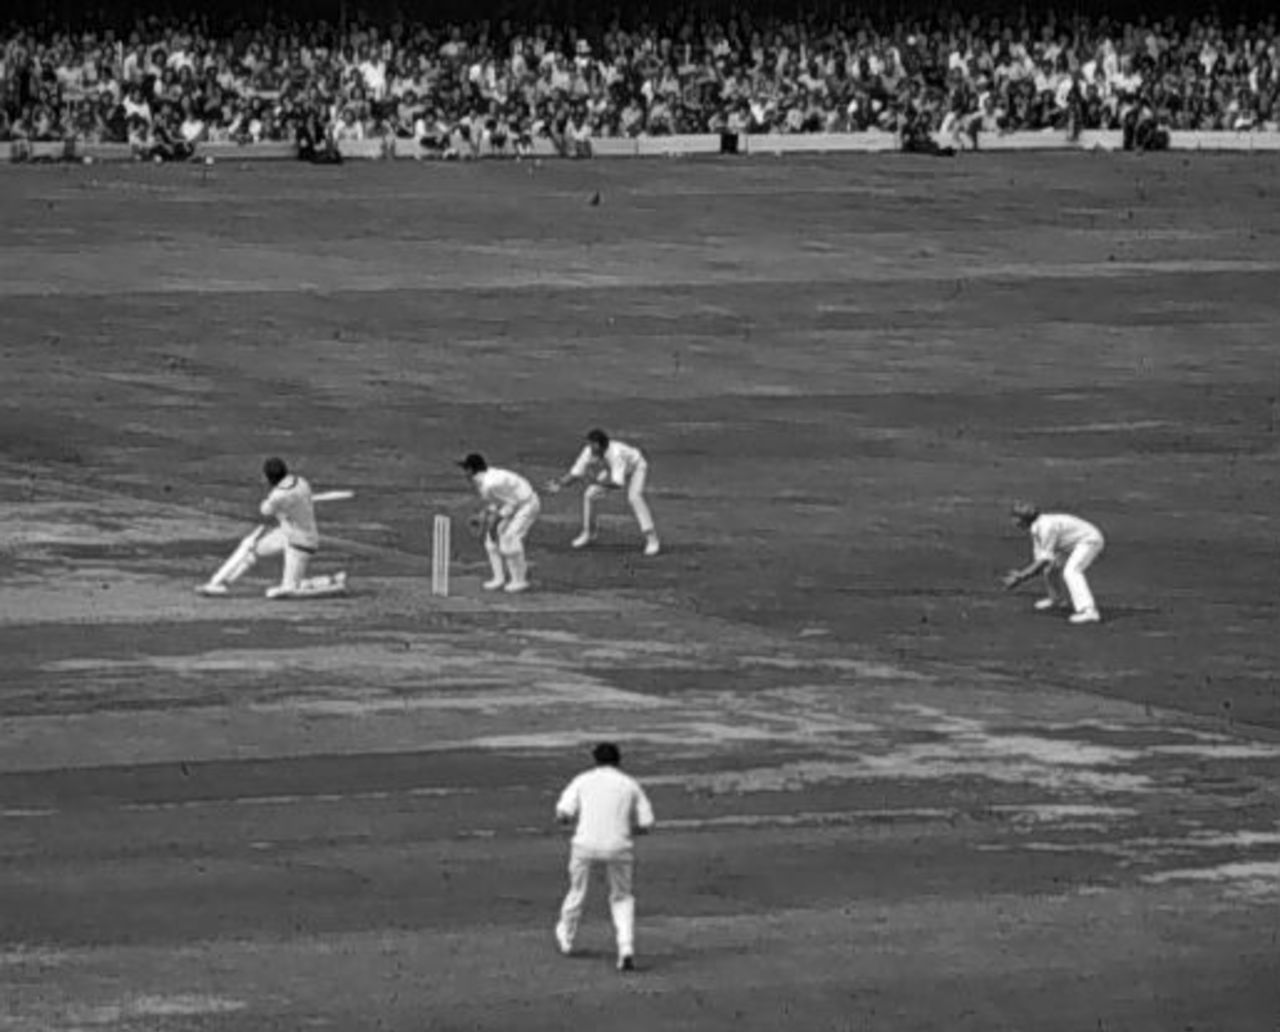 Clive Lloyd sweeps during his innings of 63, England v West Indies, 3rd Test, Lord's, August 27, 1973